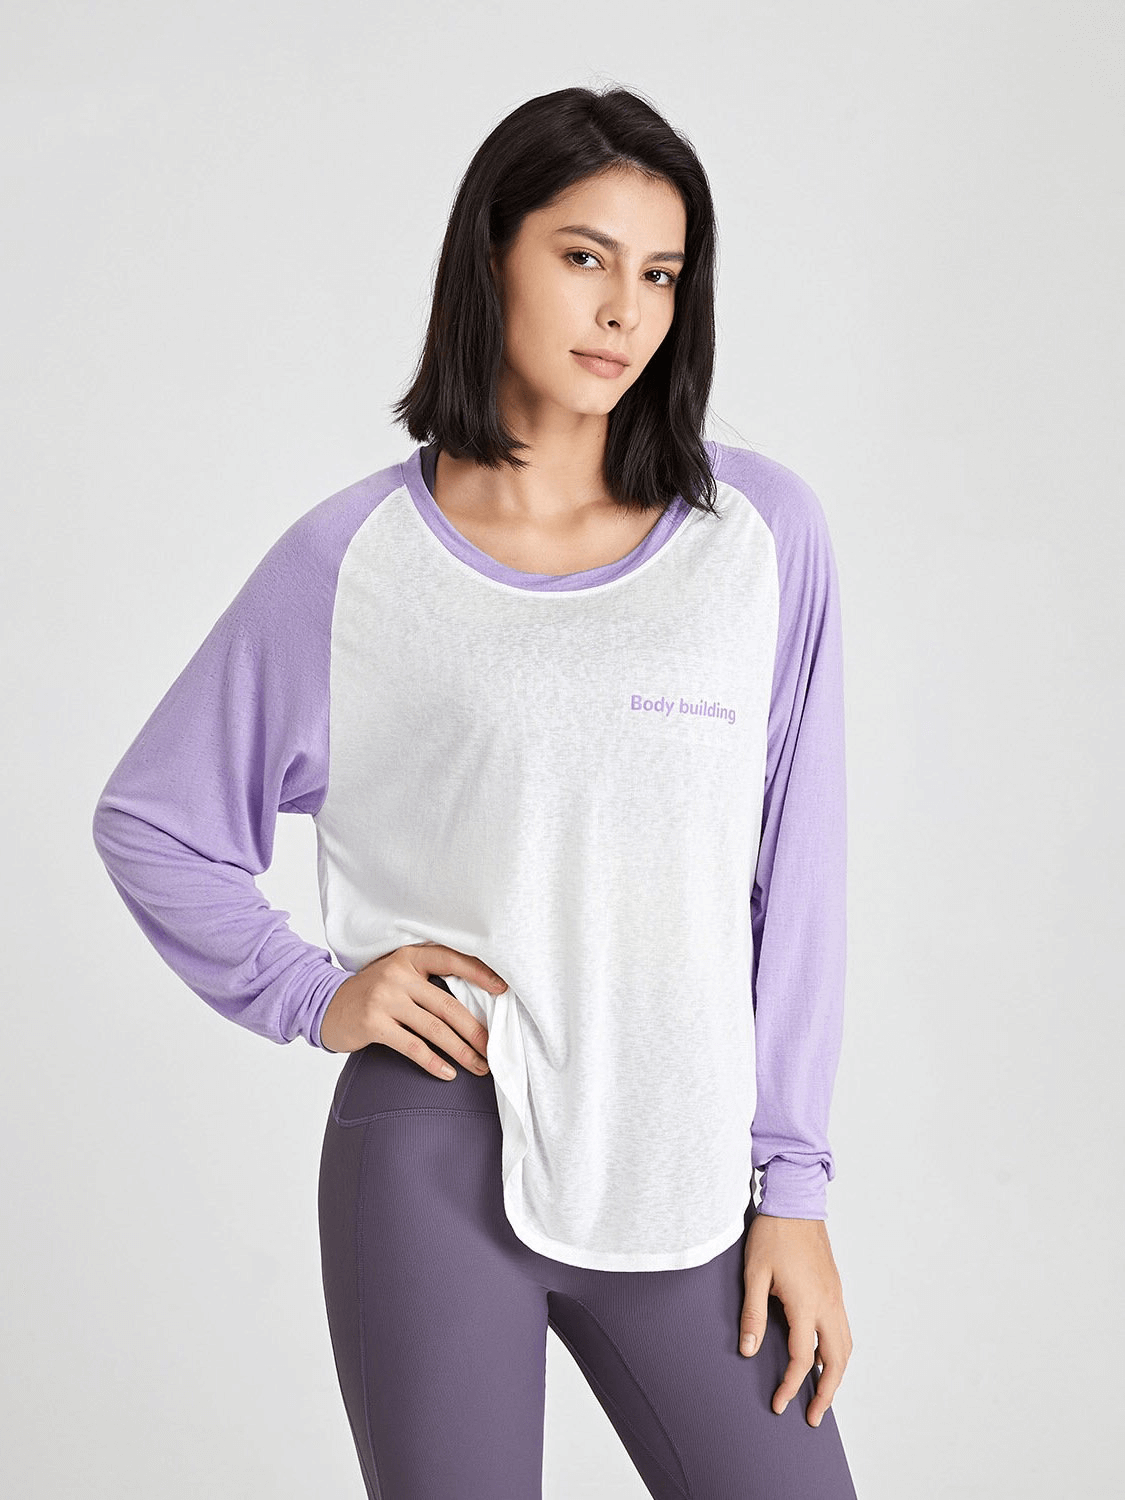 Round Neck Sports Loose Top / Women's Quick Dry Running Clothing - SF0095